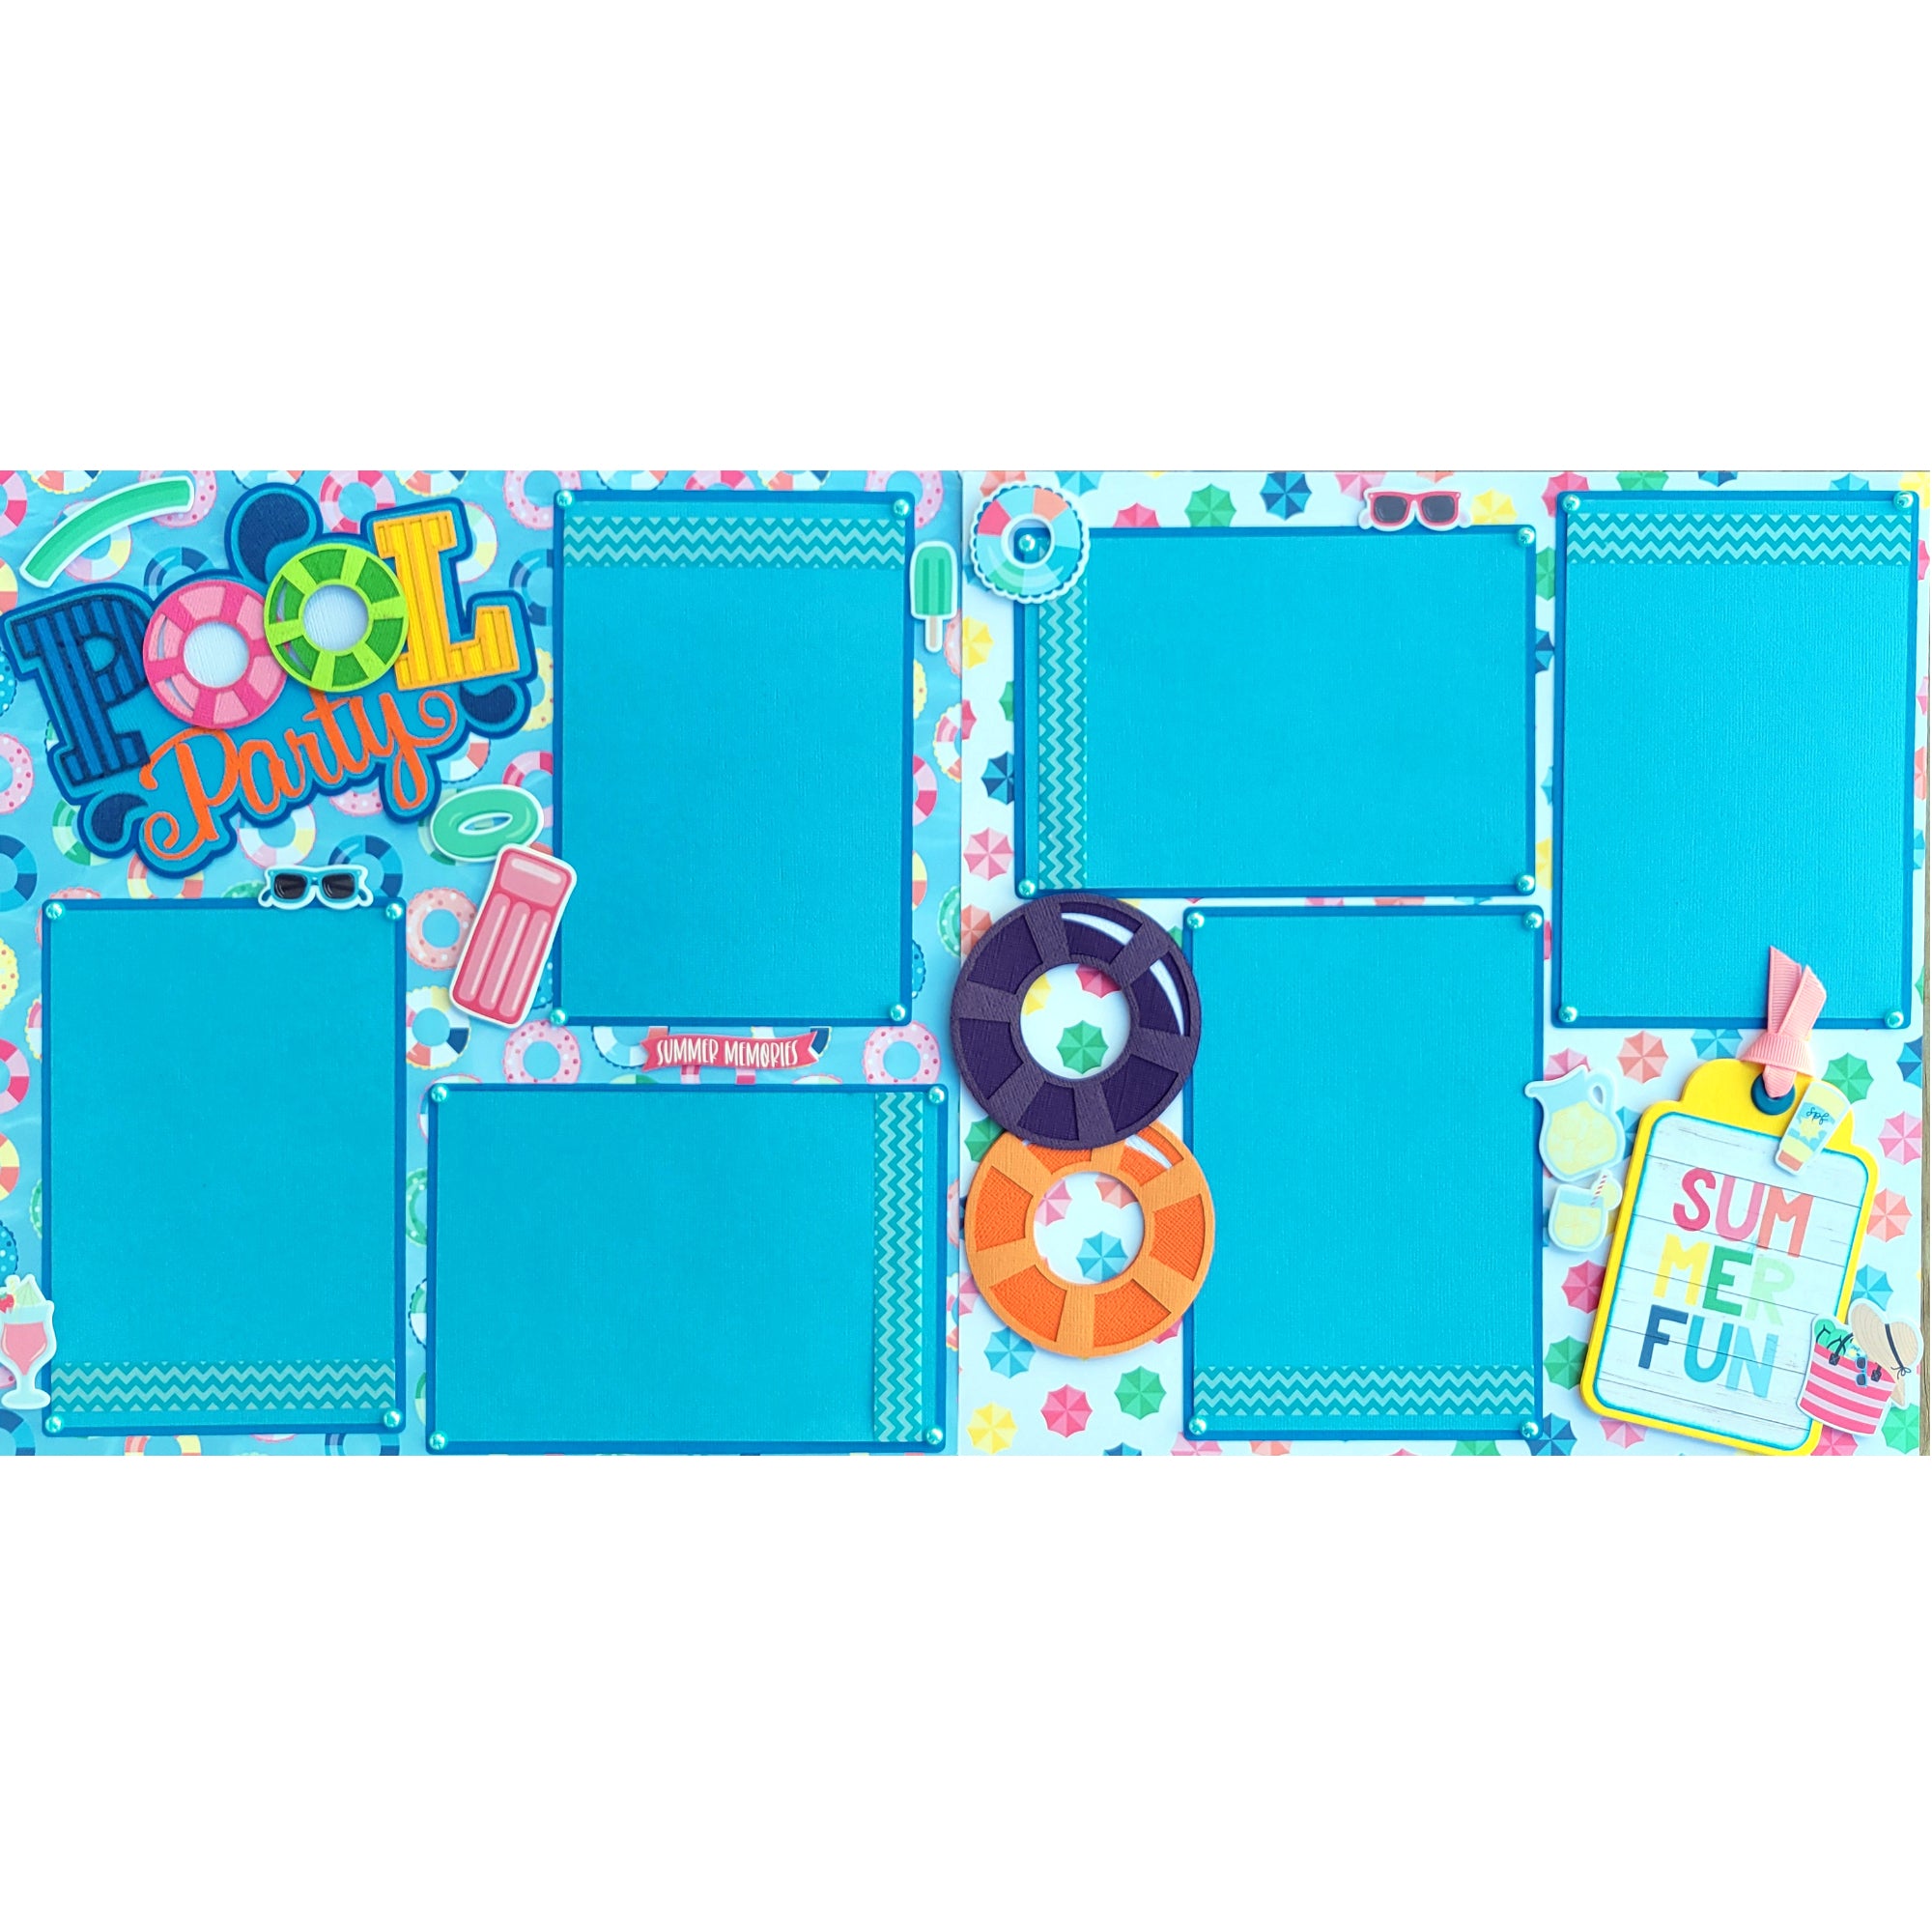 Summer Fun Pool Party (2) - 12 x 12 Pages, Fully-Assembled & Hand-Crafted 3D Scrapbook Premade by SSC Designs